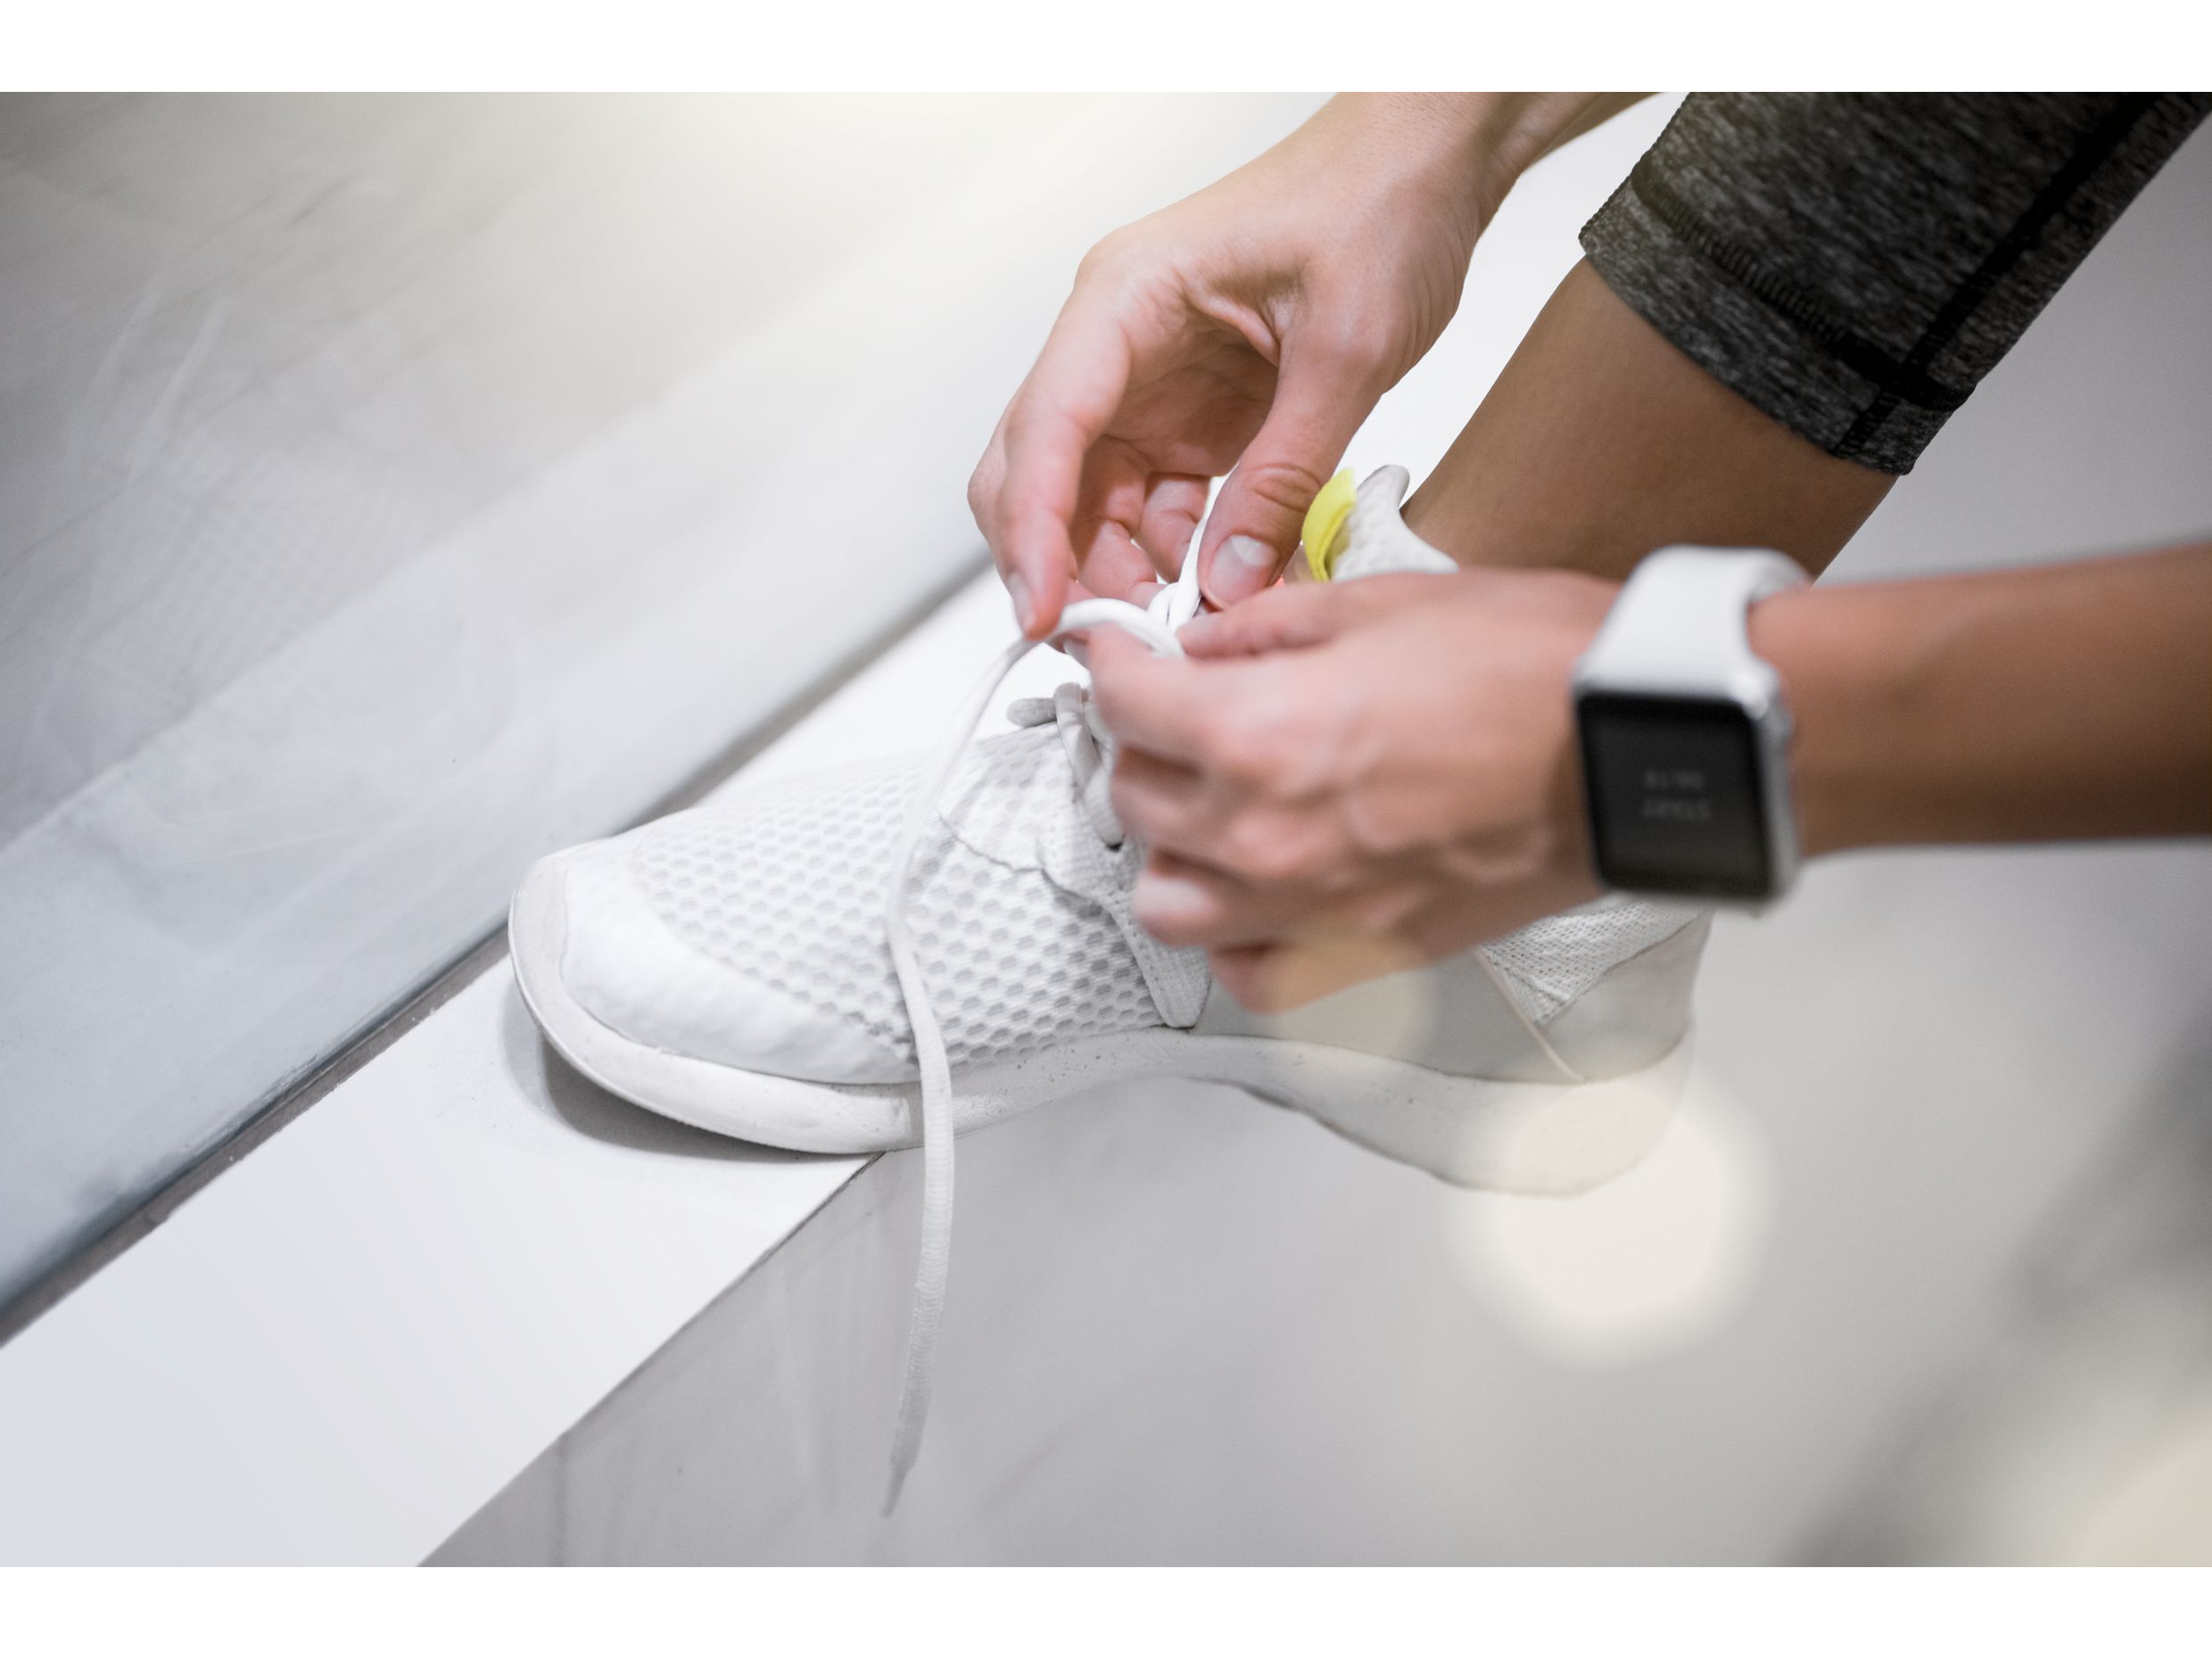 Focus on woman's hands with smart watch lace up her sneakers